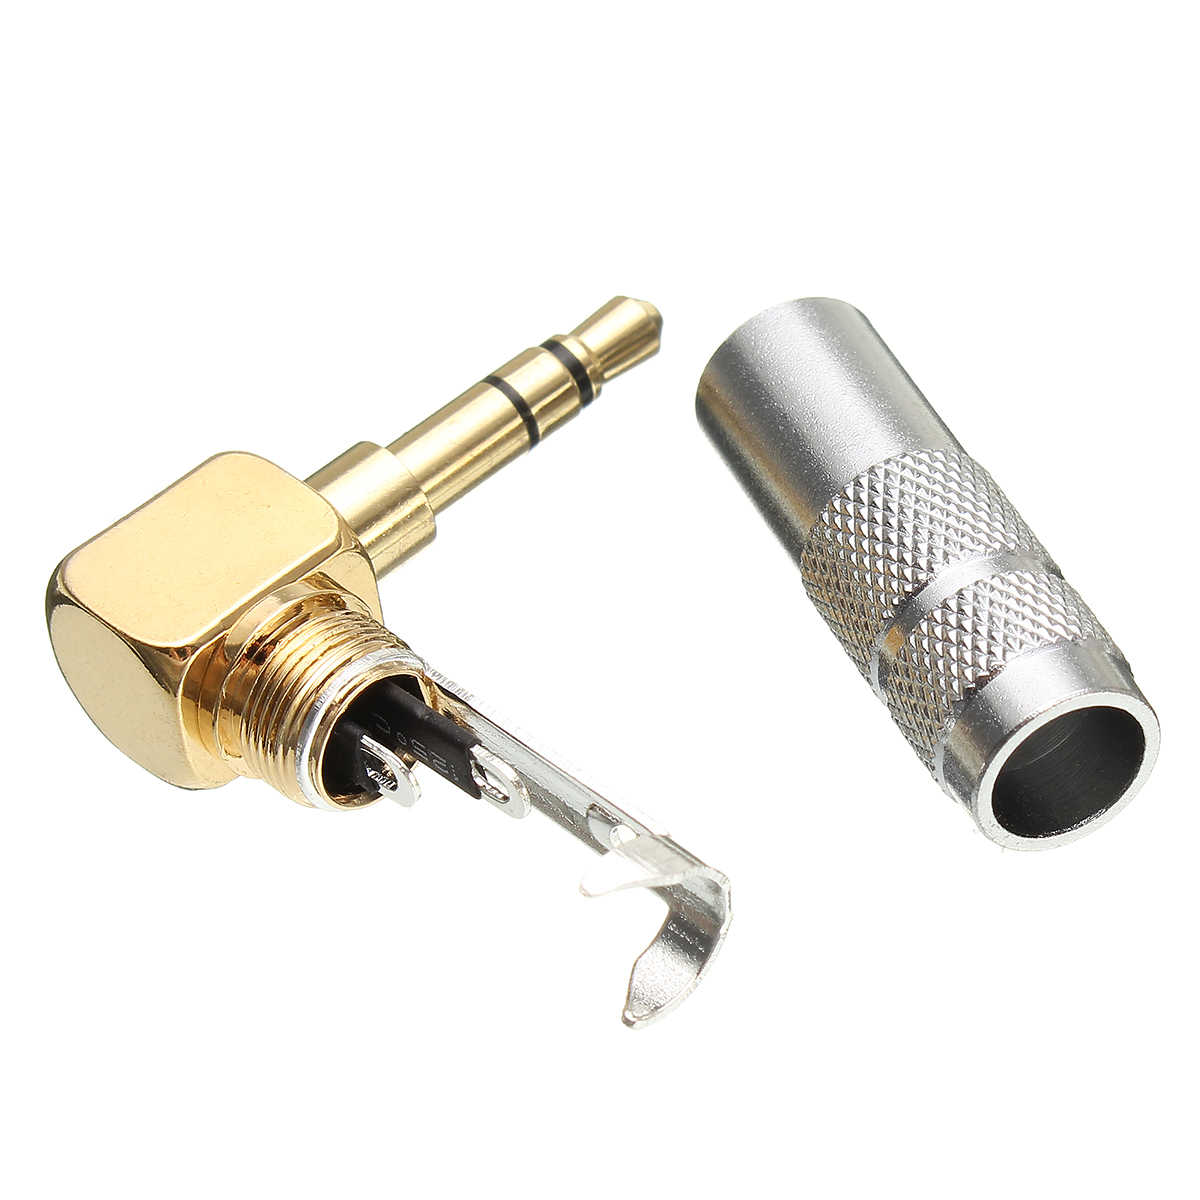 35mm-Audio-Connector-Three-level-Three-section-90-degree-Headphone-Audio-Jack-35mm-Stereo-Pin-Elbow-1761015